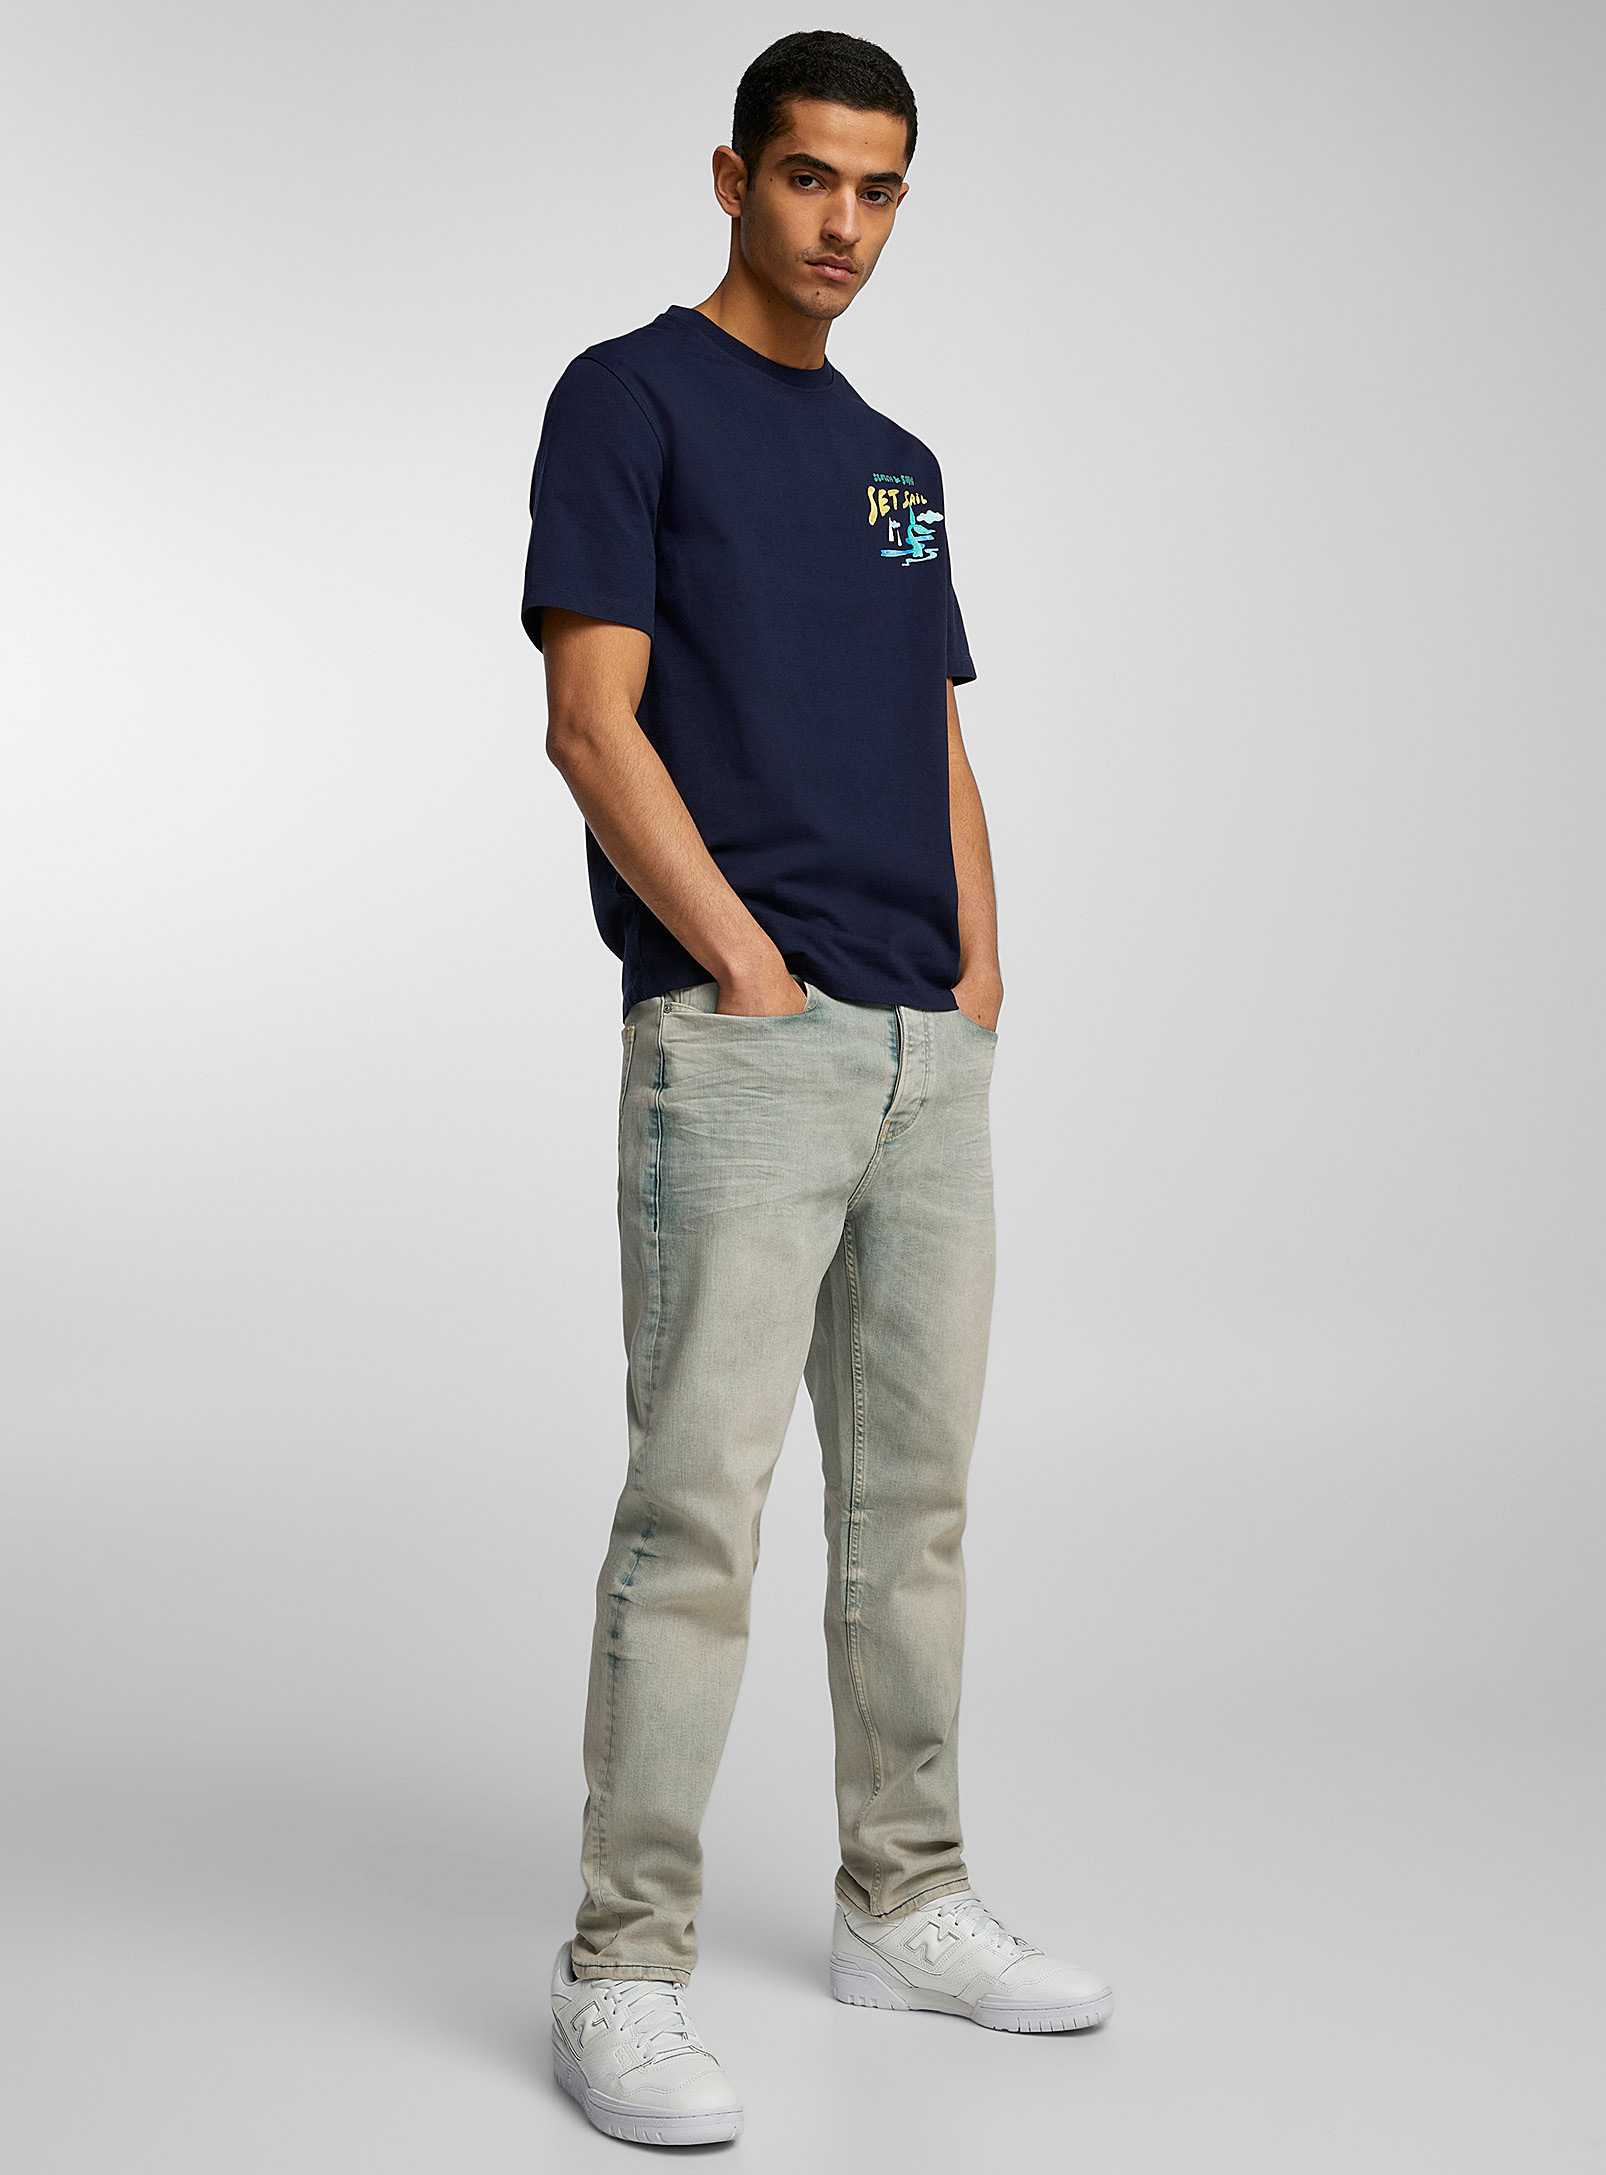 Scotch & Soda - Men's The Drop light faded jean Tapered fit